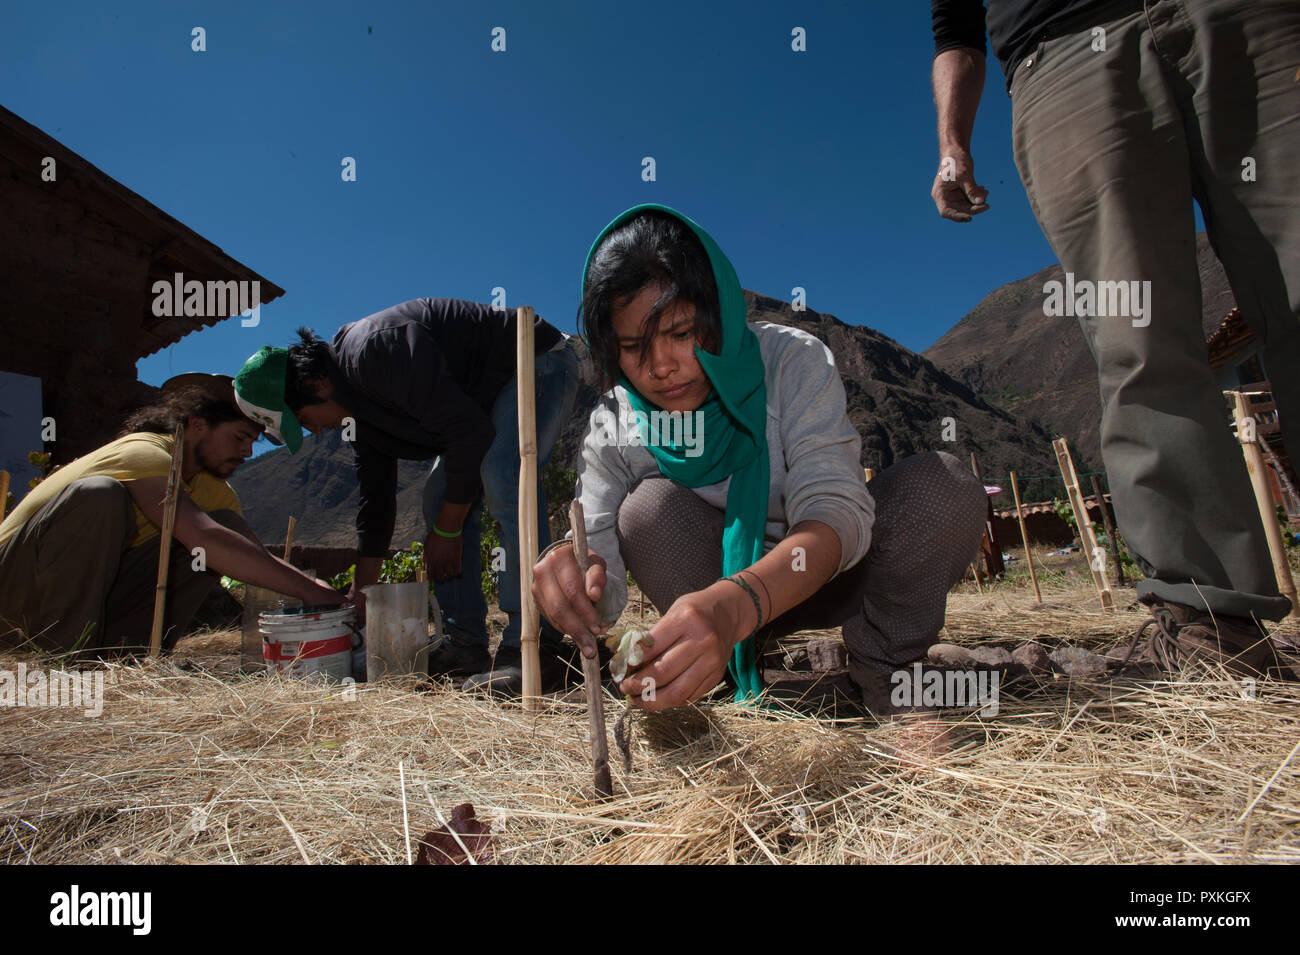 Permaculture is a great philosophy made of good practice that is spreading in Peru, the art hotel of Lamay seems to be the right place for a workshop  Stock Photo